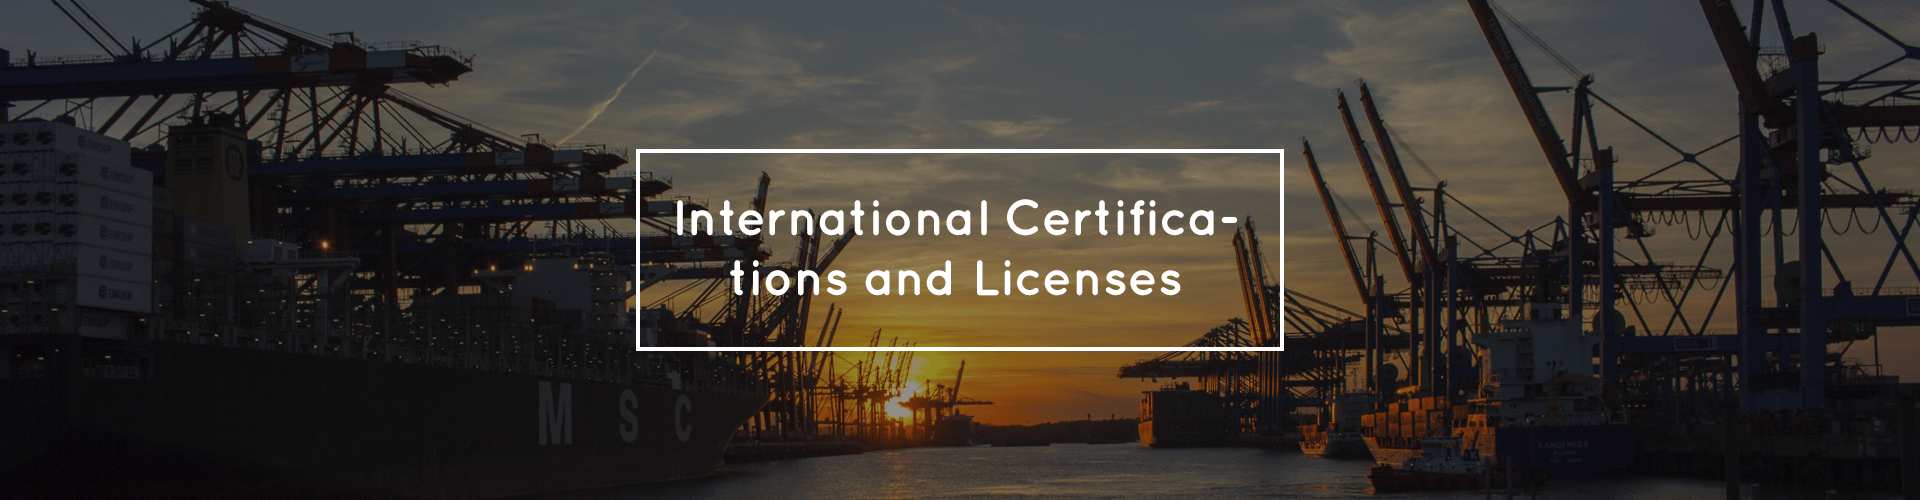 International certifications and licenses